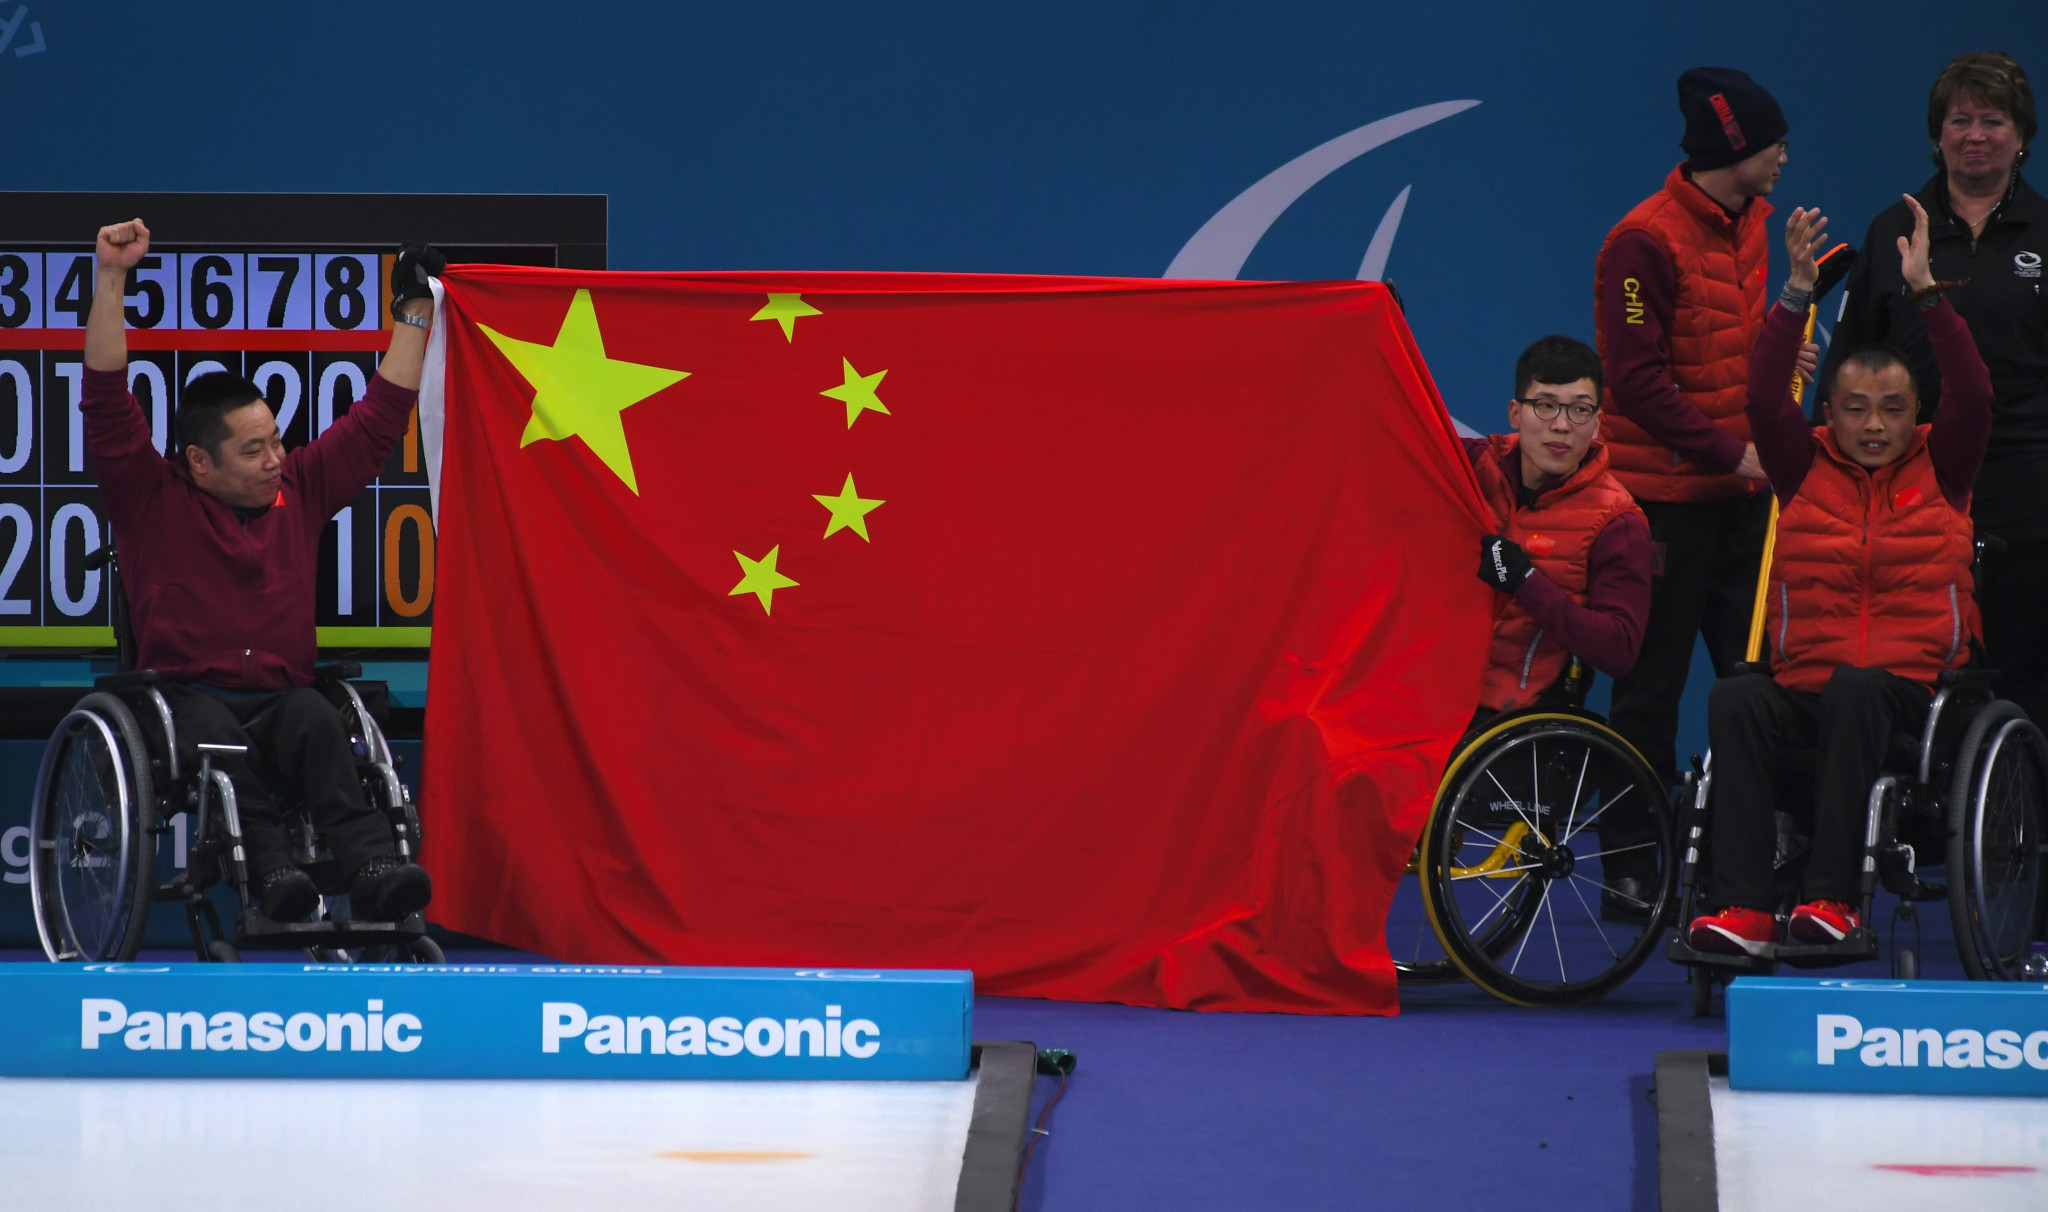 China's wheelchair curling team celebrate their gold at Pyeongchang 2018 - the country's first ever medal at the Winter Paralympic Games having made their debut at Salt Lake City 2002 ©Getty Images